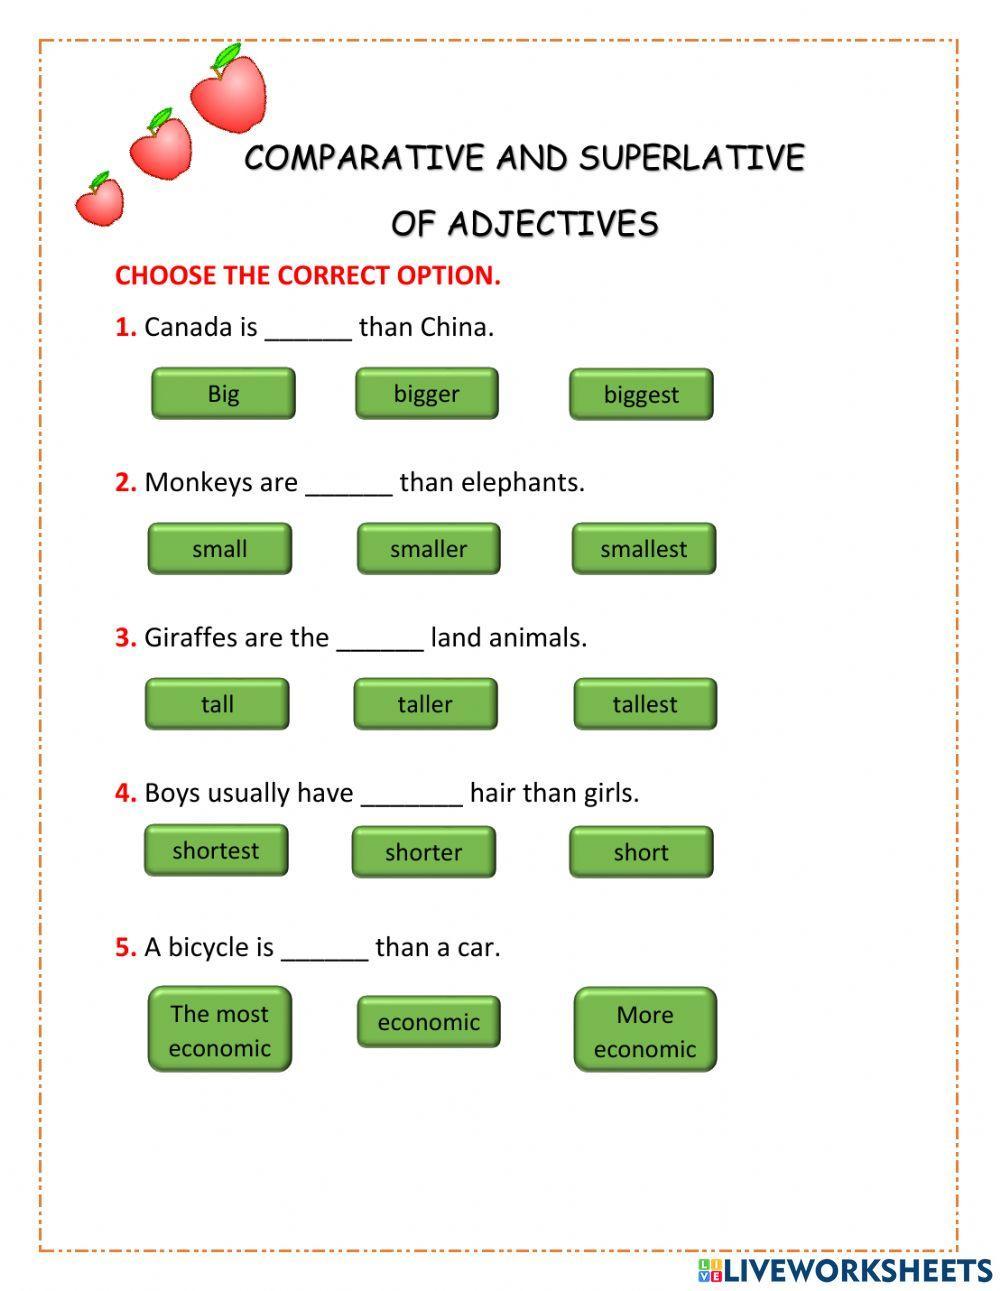 Comparative and superlative of adjectives